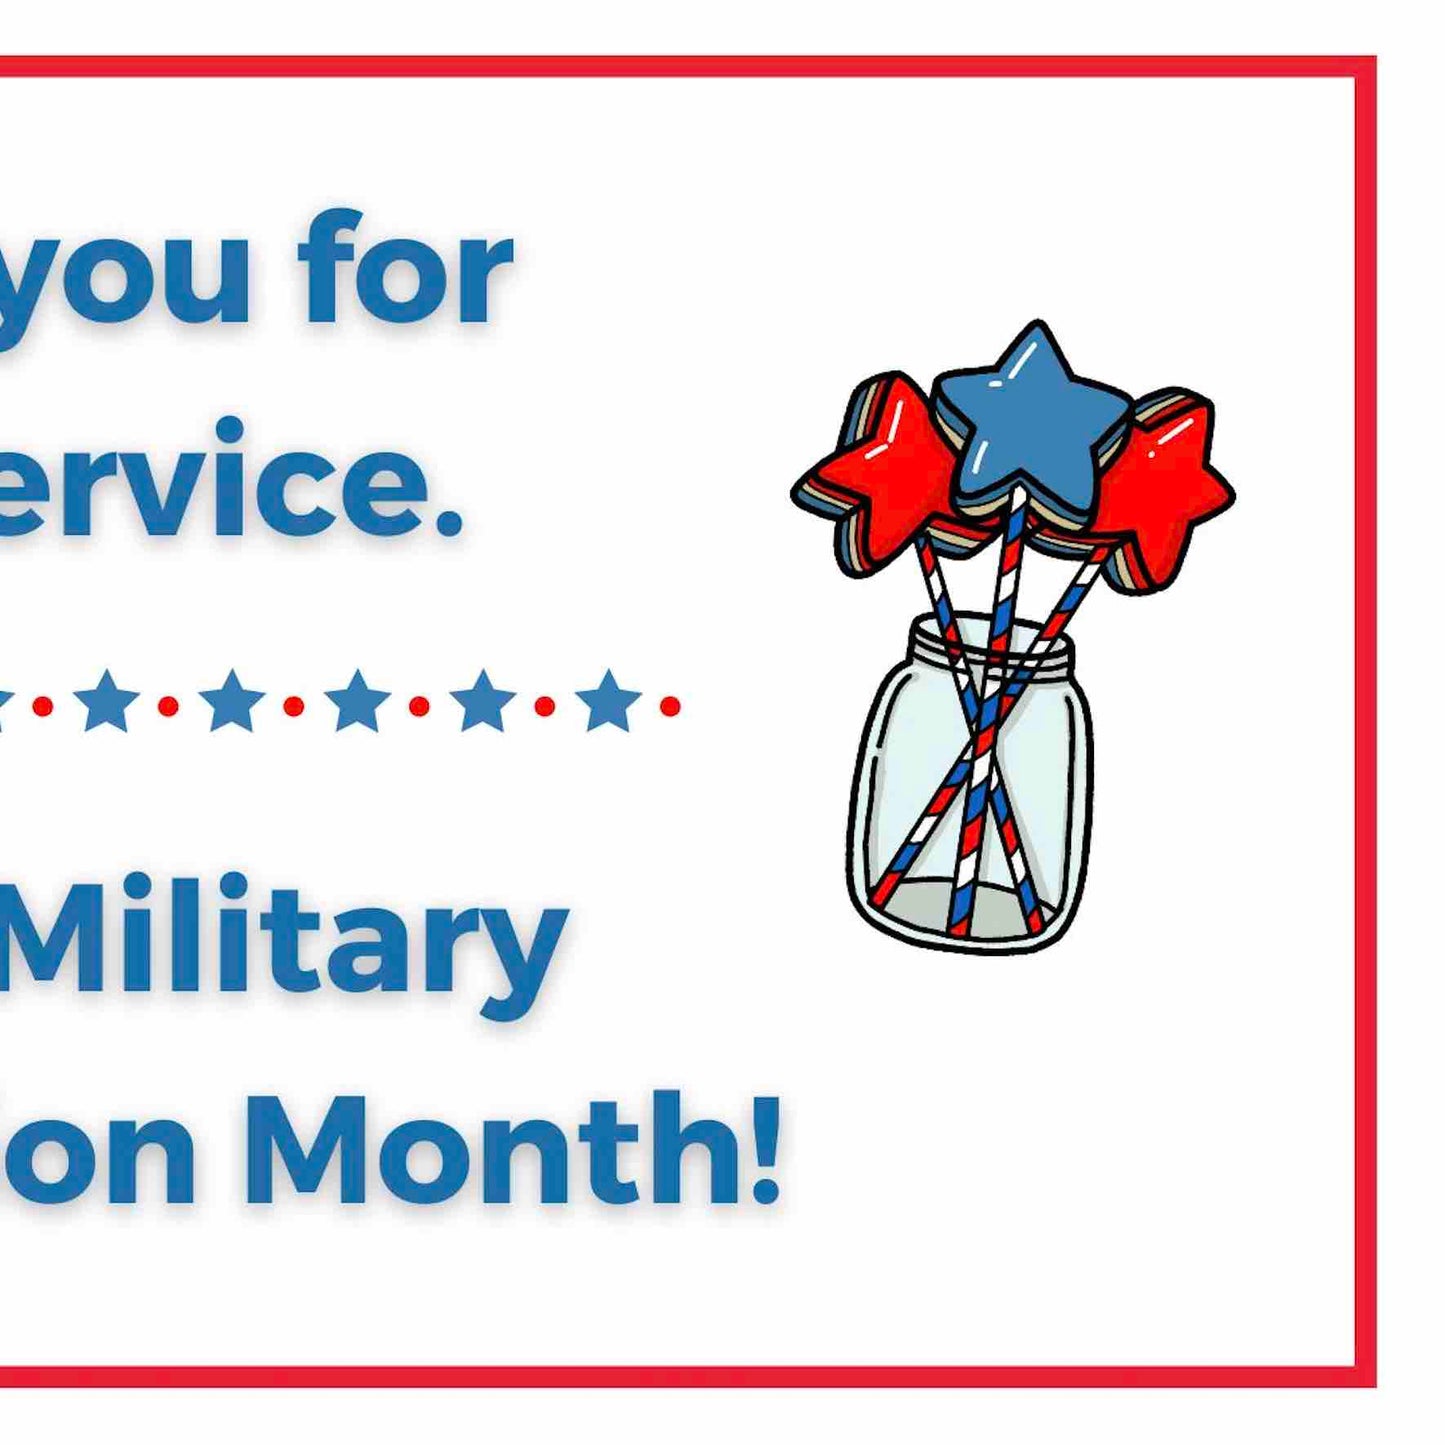 Thank You for Your Service (Military Appreciation)